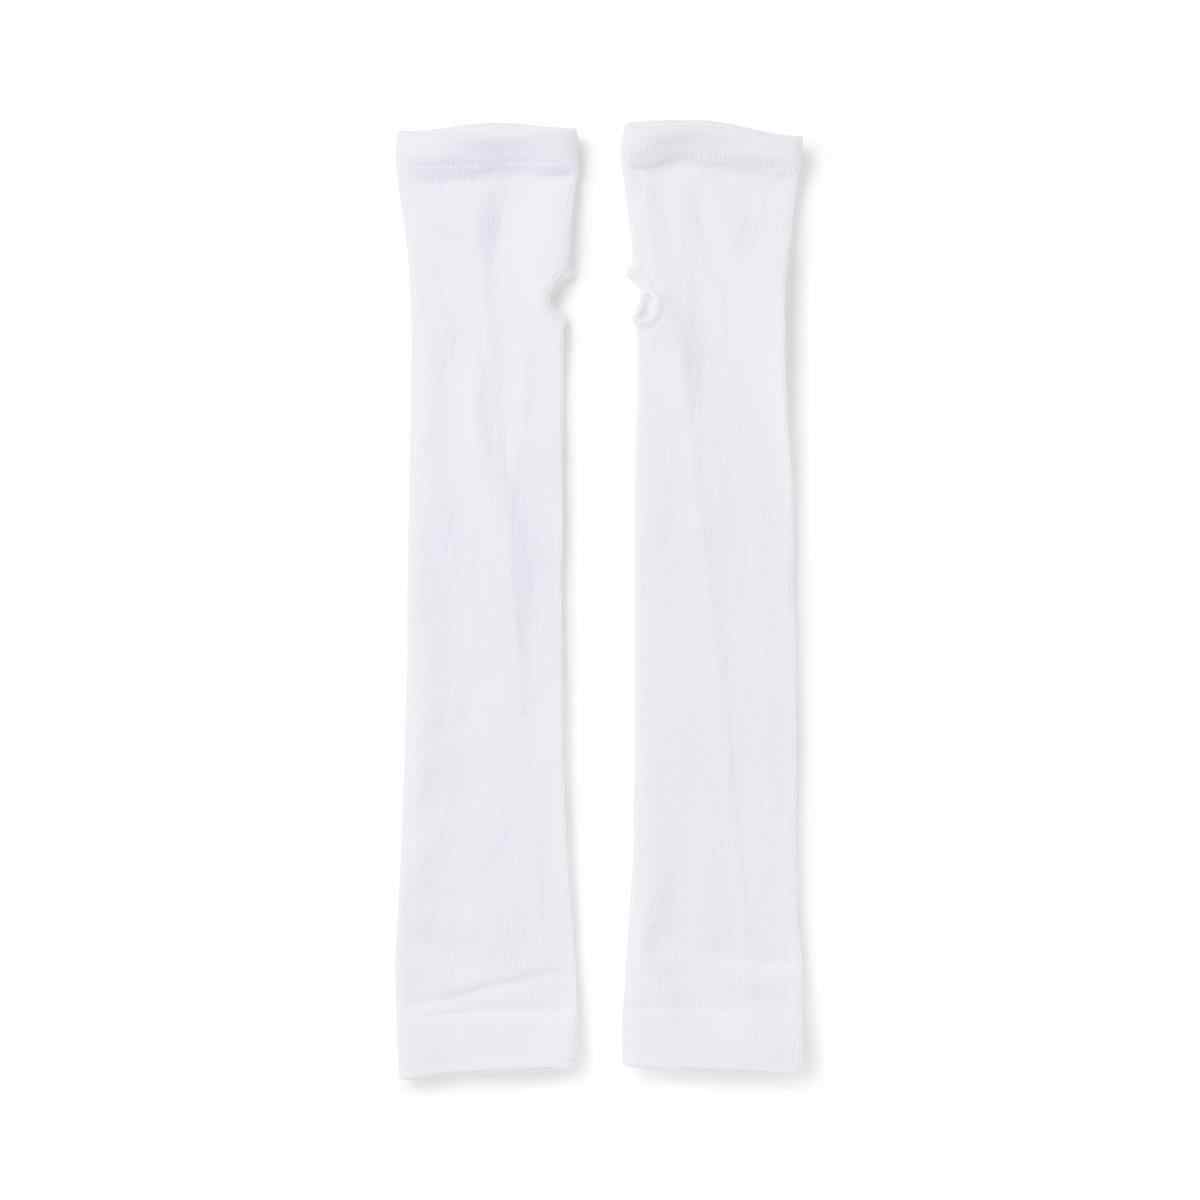 Medline Protective Arm Sleeves, NONSLEEVE, White (18.0" L, Universal Fit) - 1 Pair